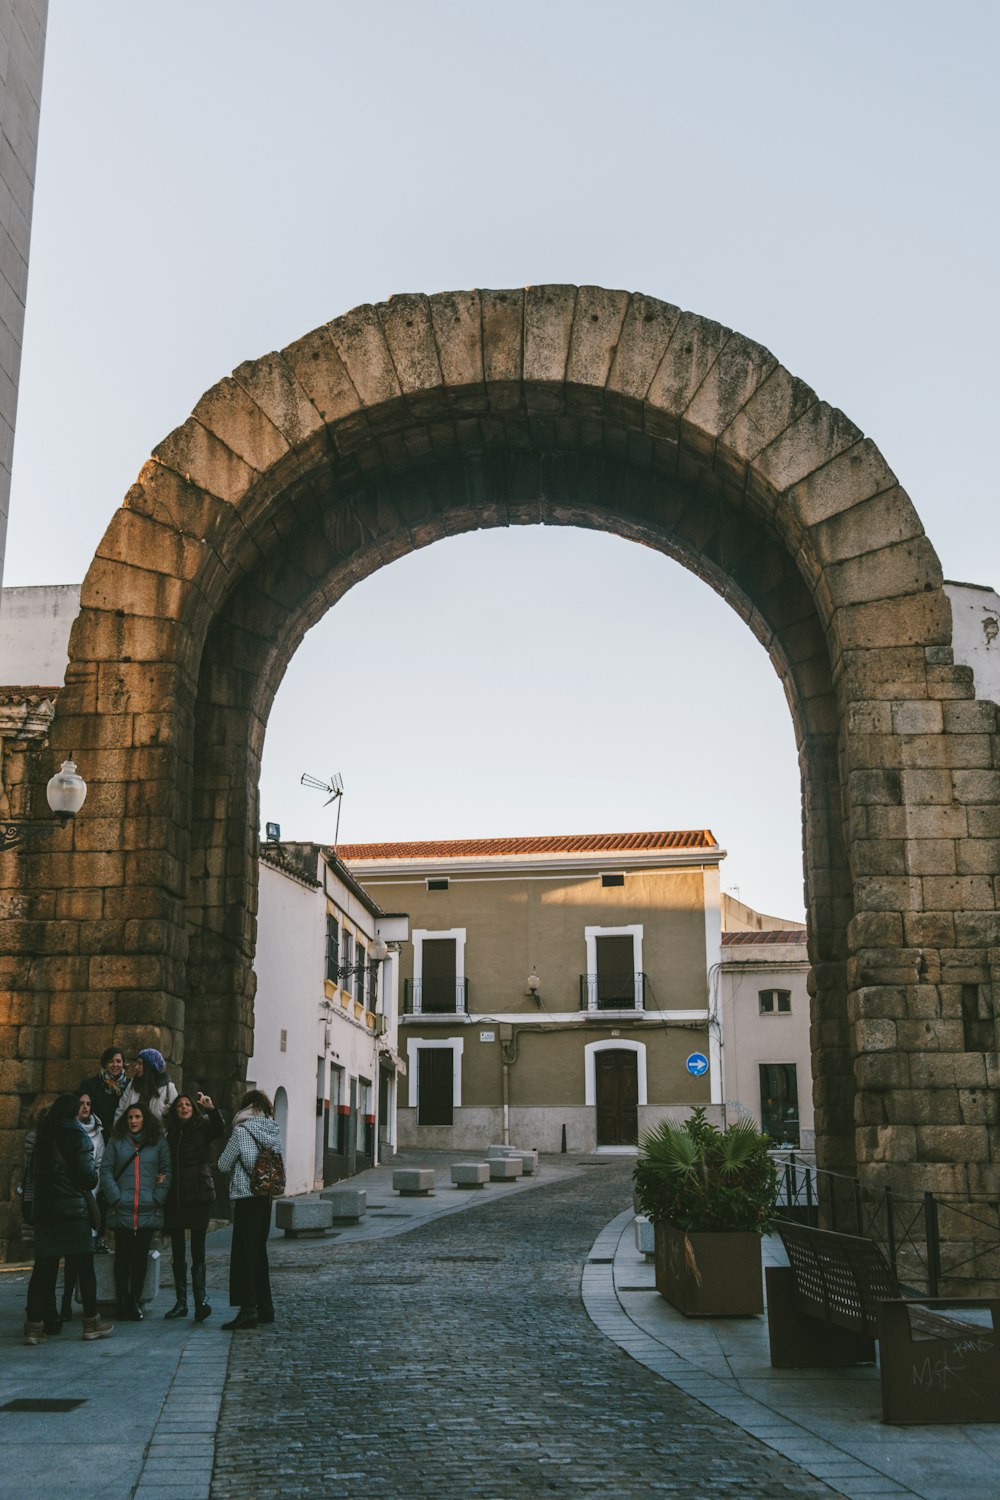 a group of people standing under a stone arch